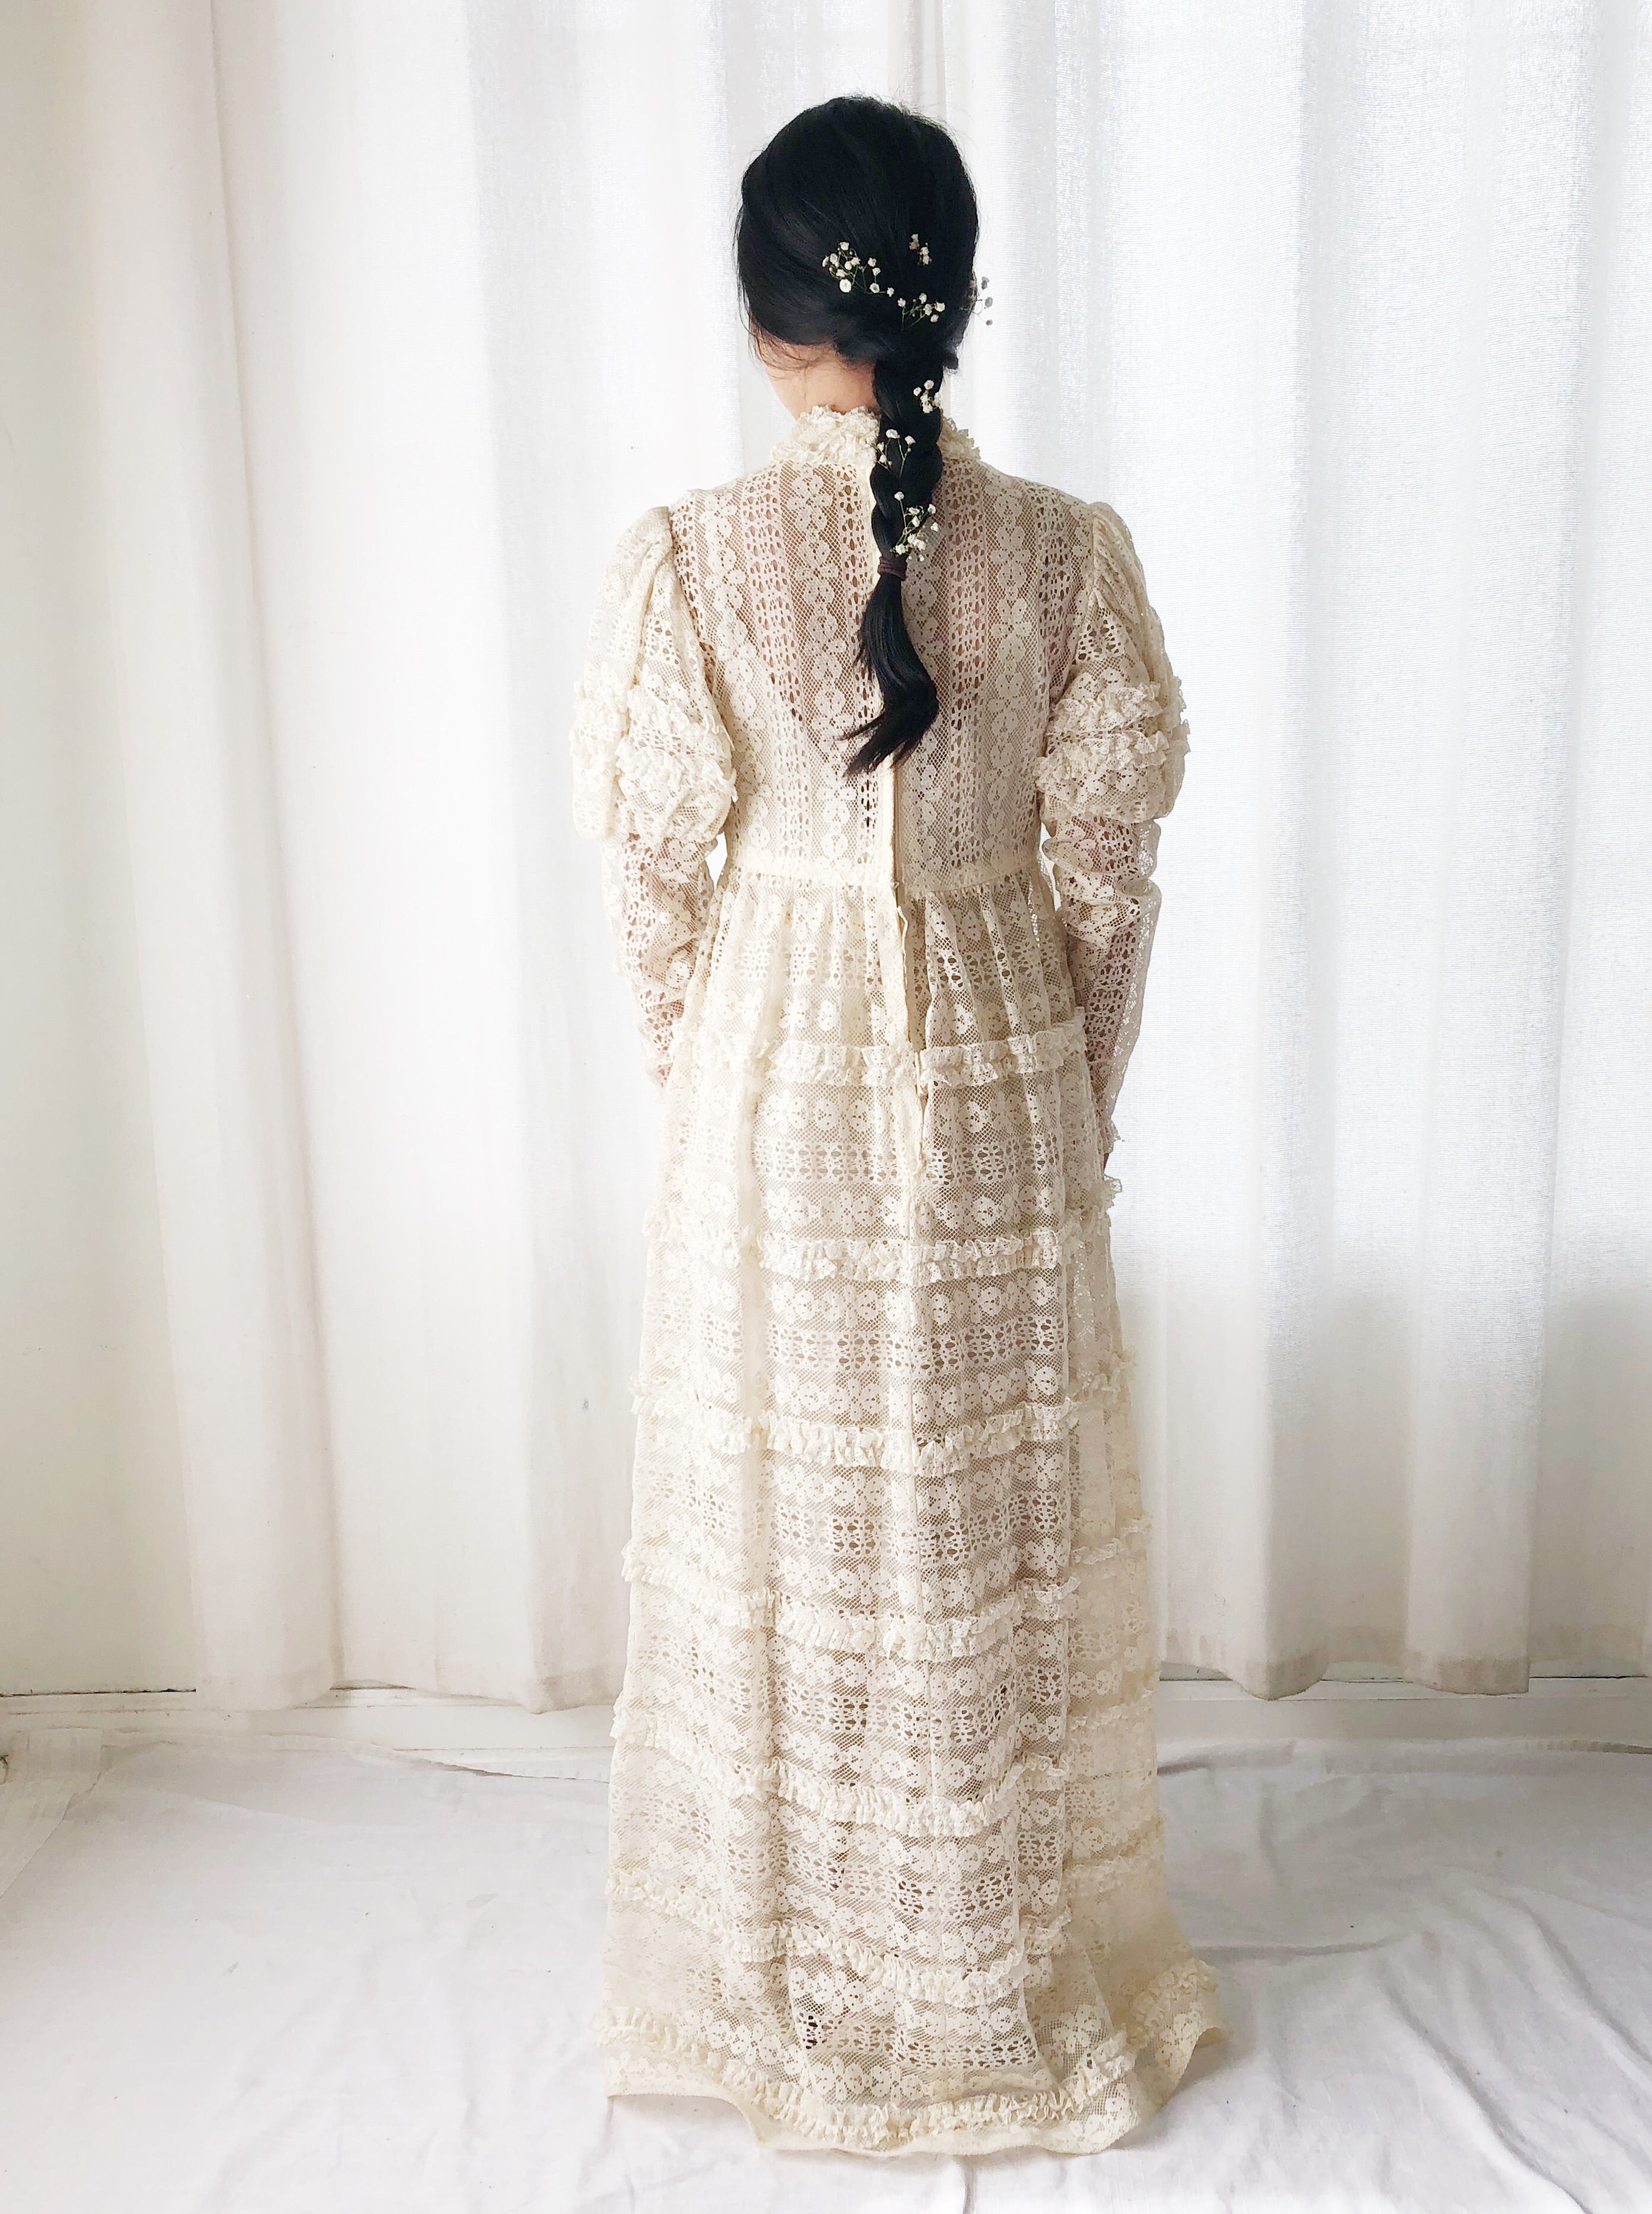 1970s Bohemian Puff Sleeves Lace Dress - S